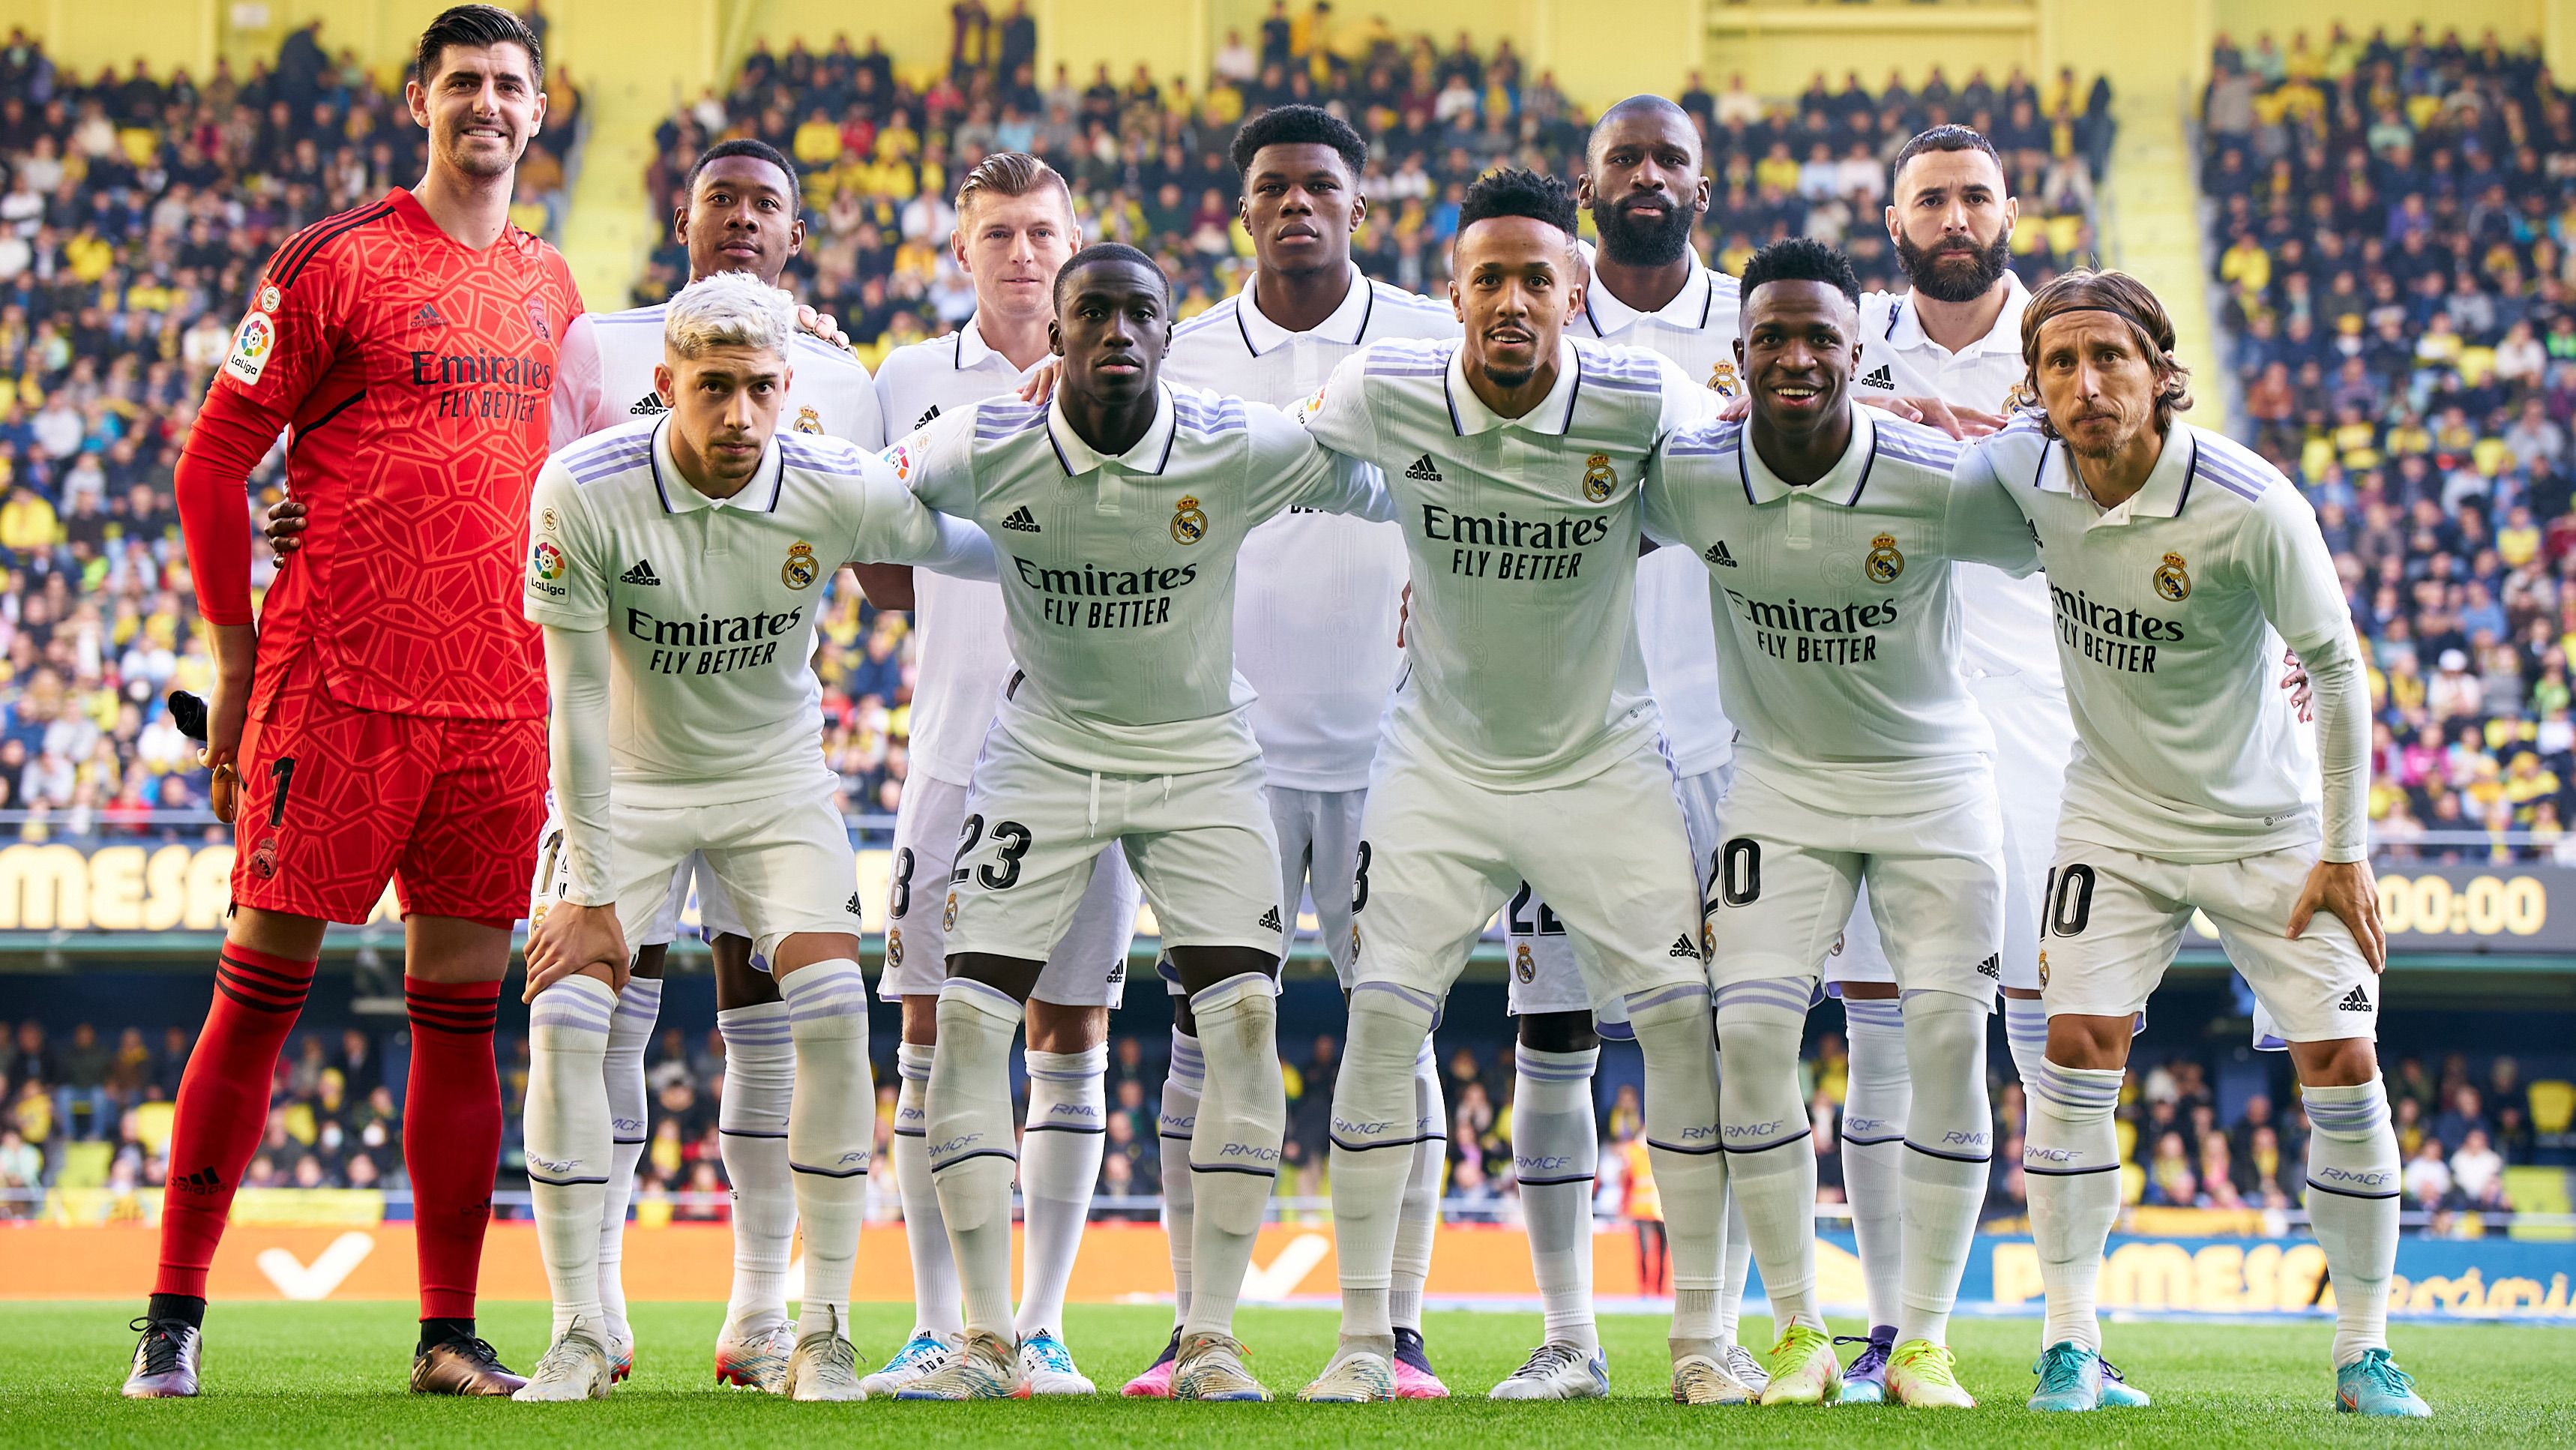 Real Madrid fields starting team with no Spanish players for first time in 121-year history